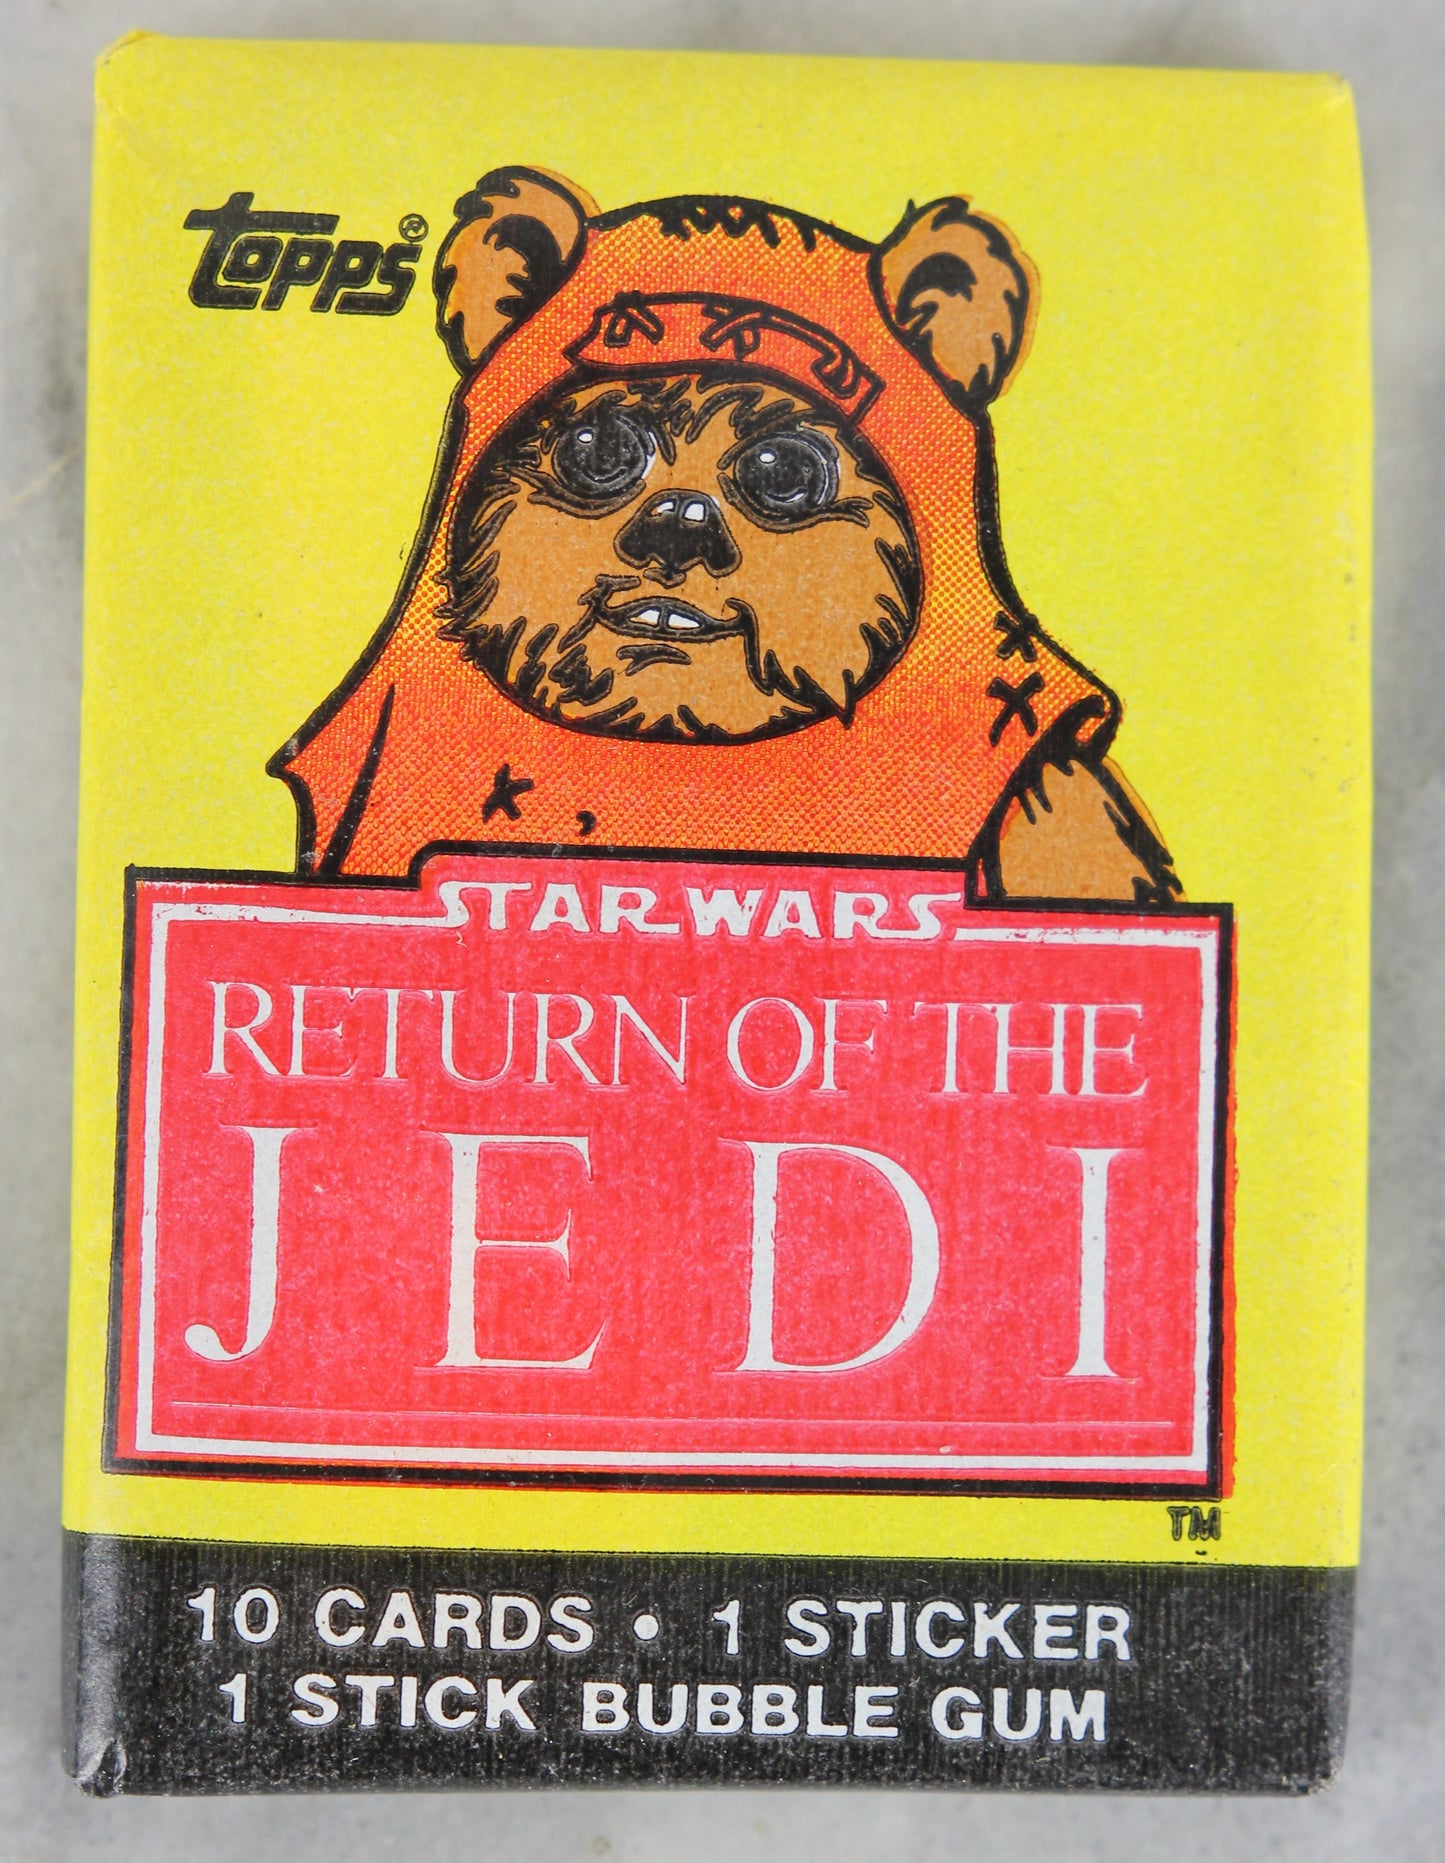 Topps Star Wars Return of the Jedi Collectible Trading Cards, One Wax Pack, Ewok Wrapper, 1983